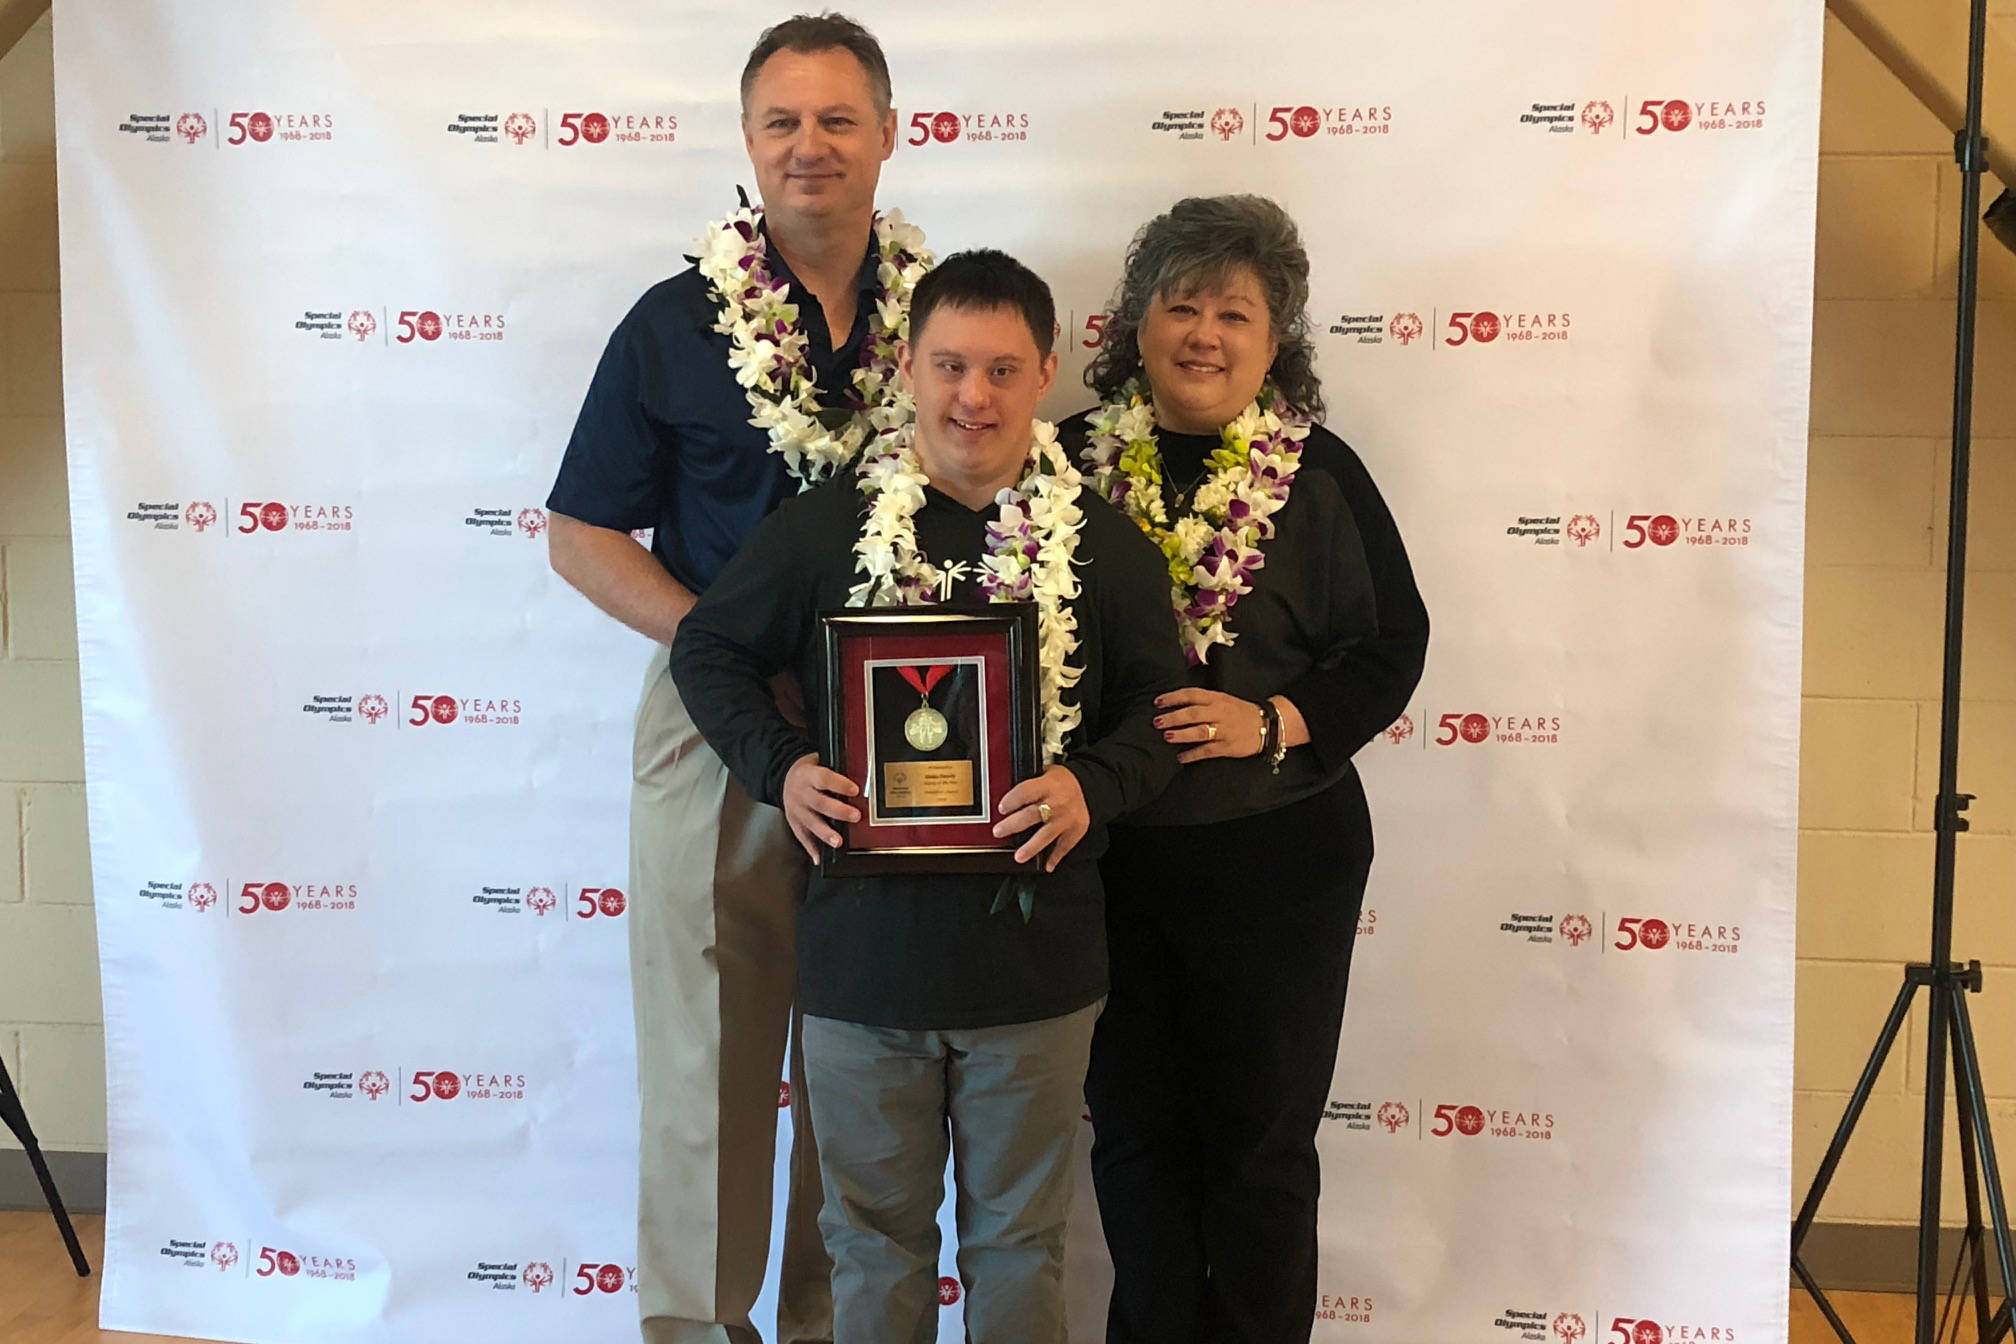 Chris, CJ and Michelle Umbs accept their Family of the Year award from the Special Olympics Alaska’s “Breakfast With Champions” event at the Special Olympics Alaska Sports, Health and Wellness Center in Anchorage on Wednesday morning. (Courtesy Photo | Gail Fenumiai)